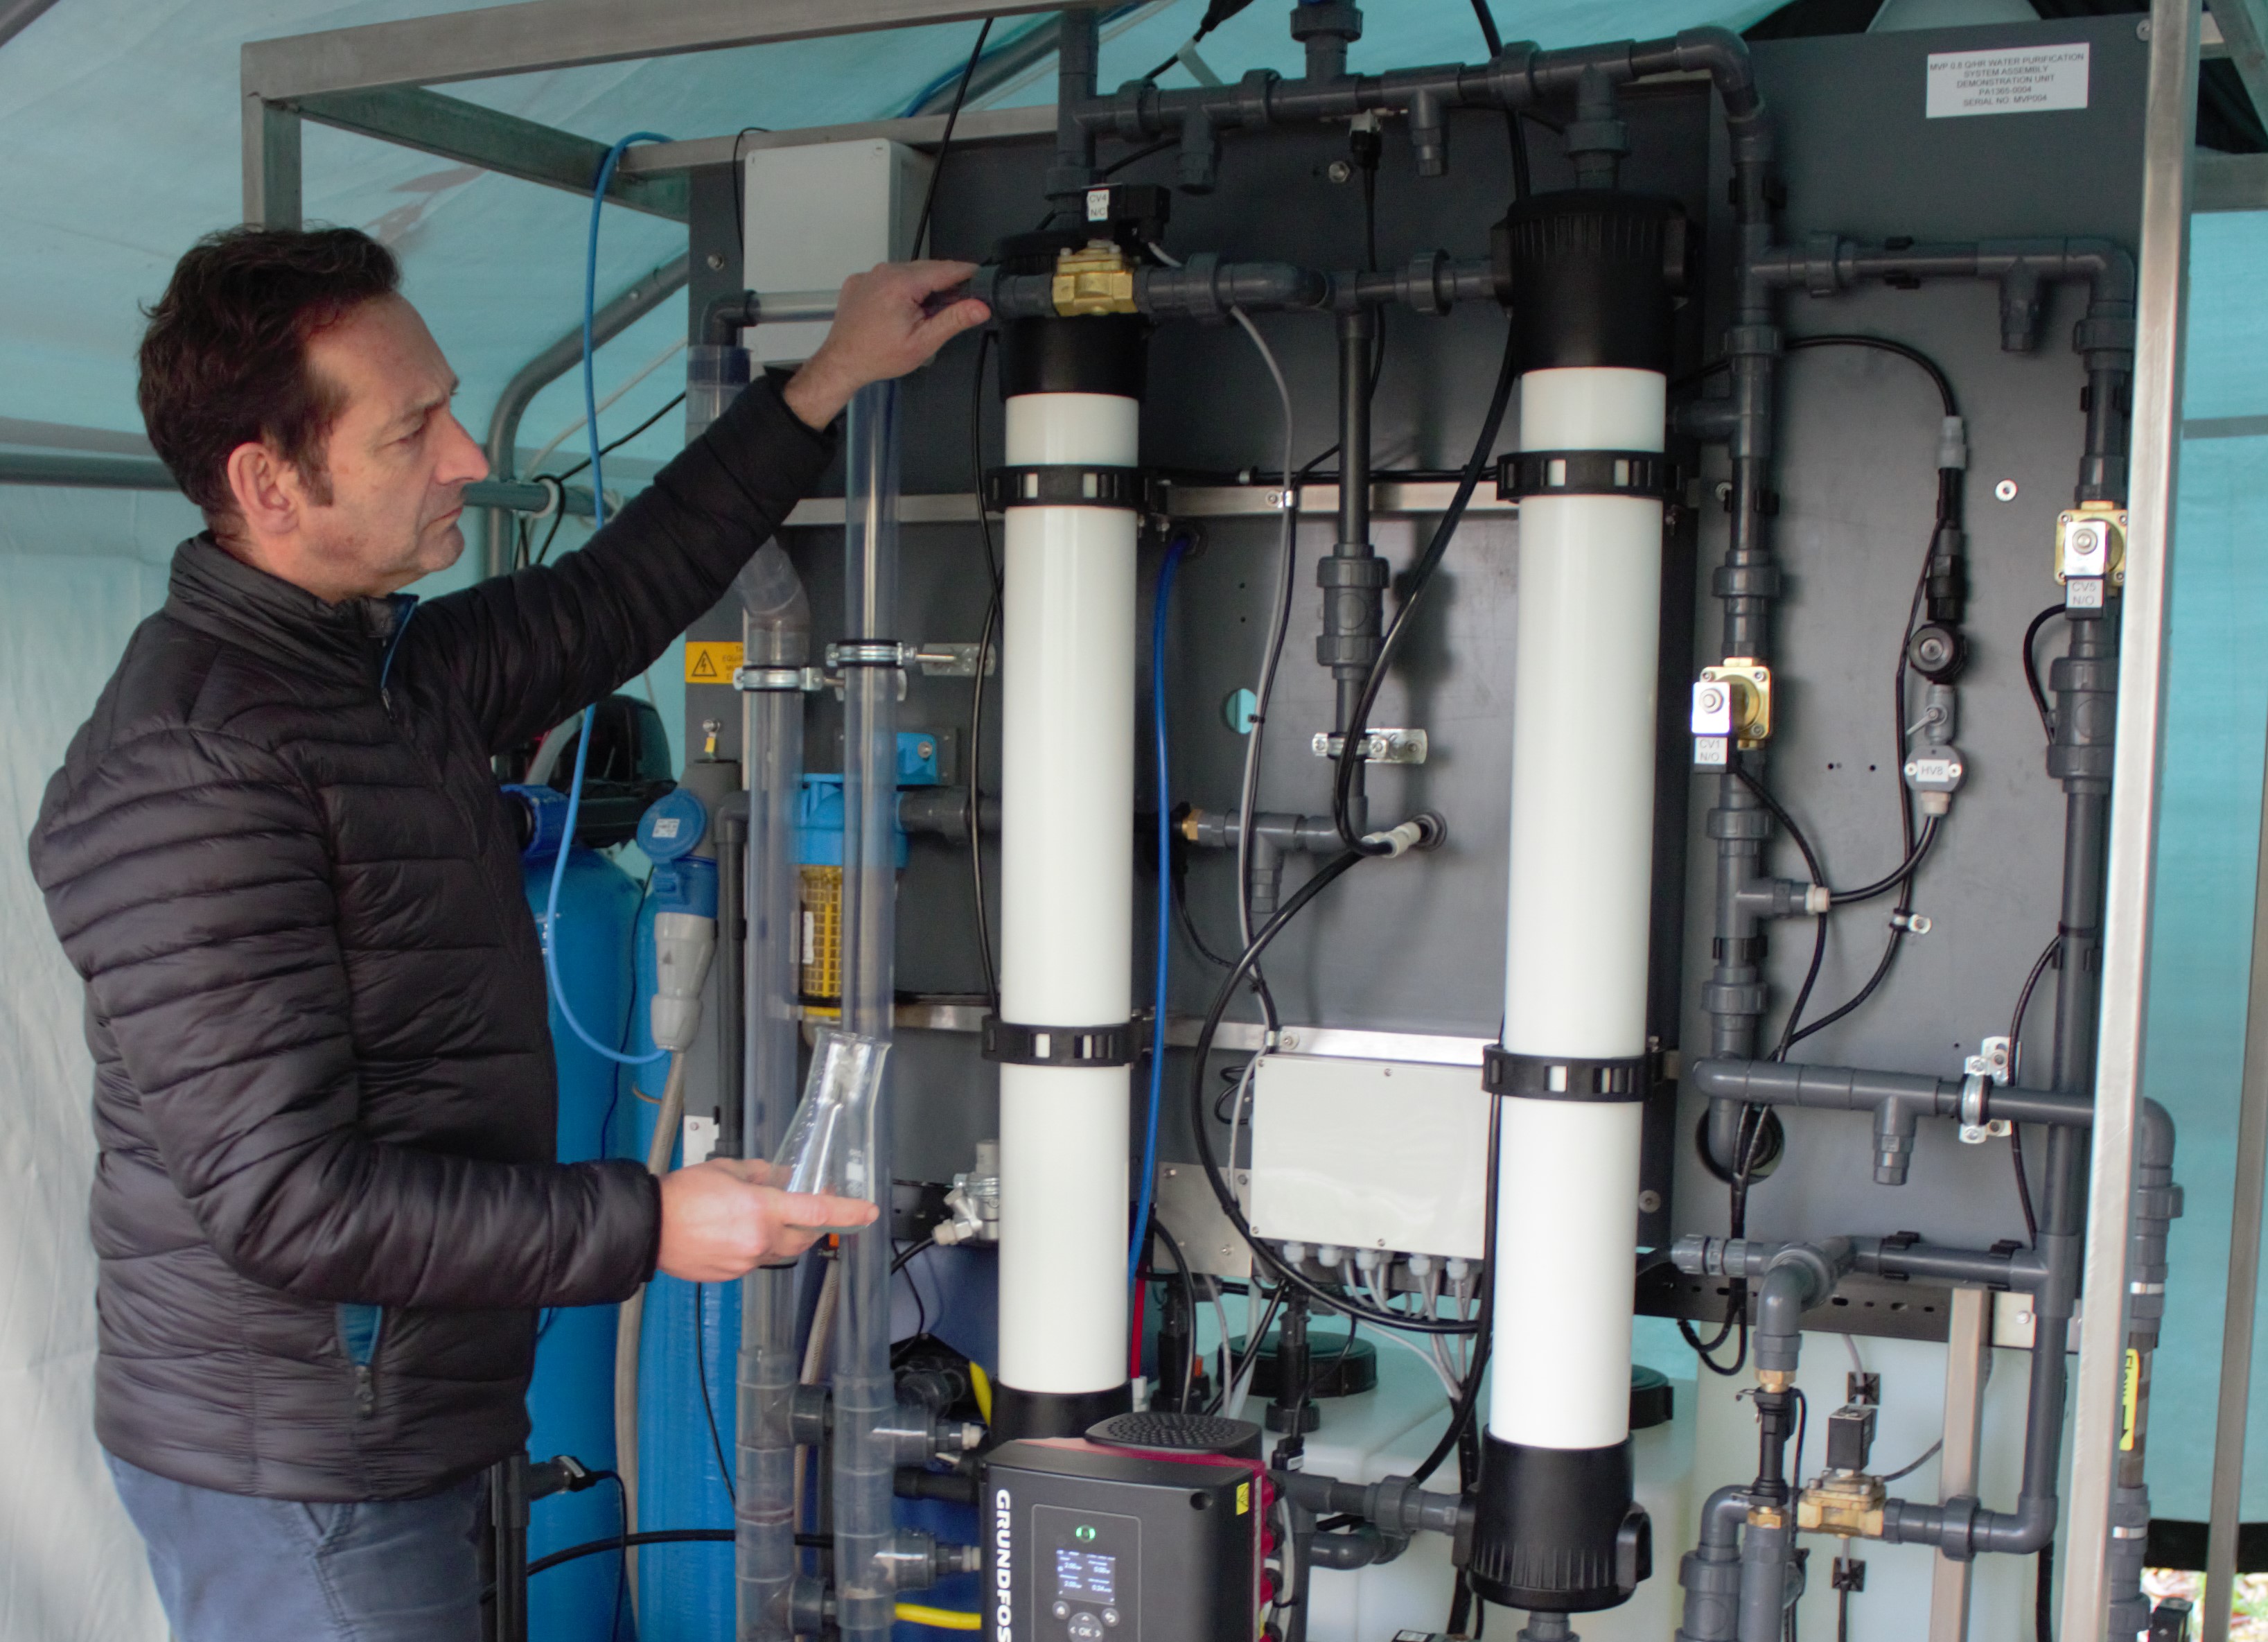 Lead scientist, Professor Darren Reynolds with the portable purification system.